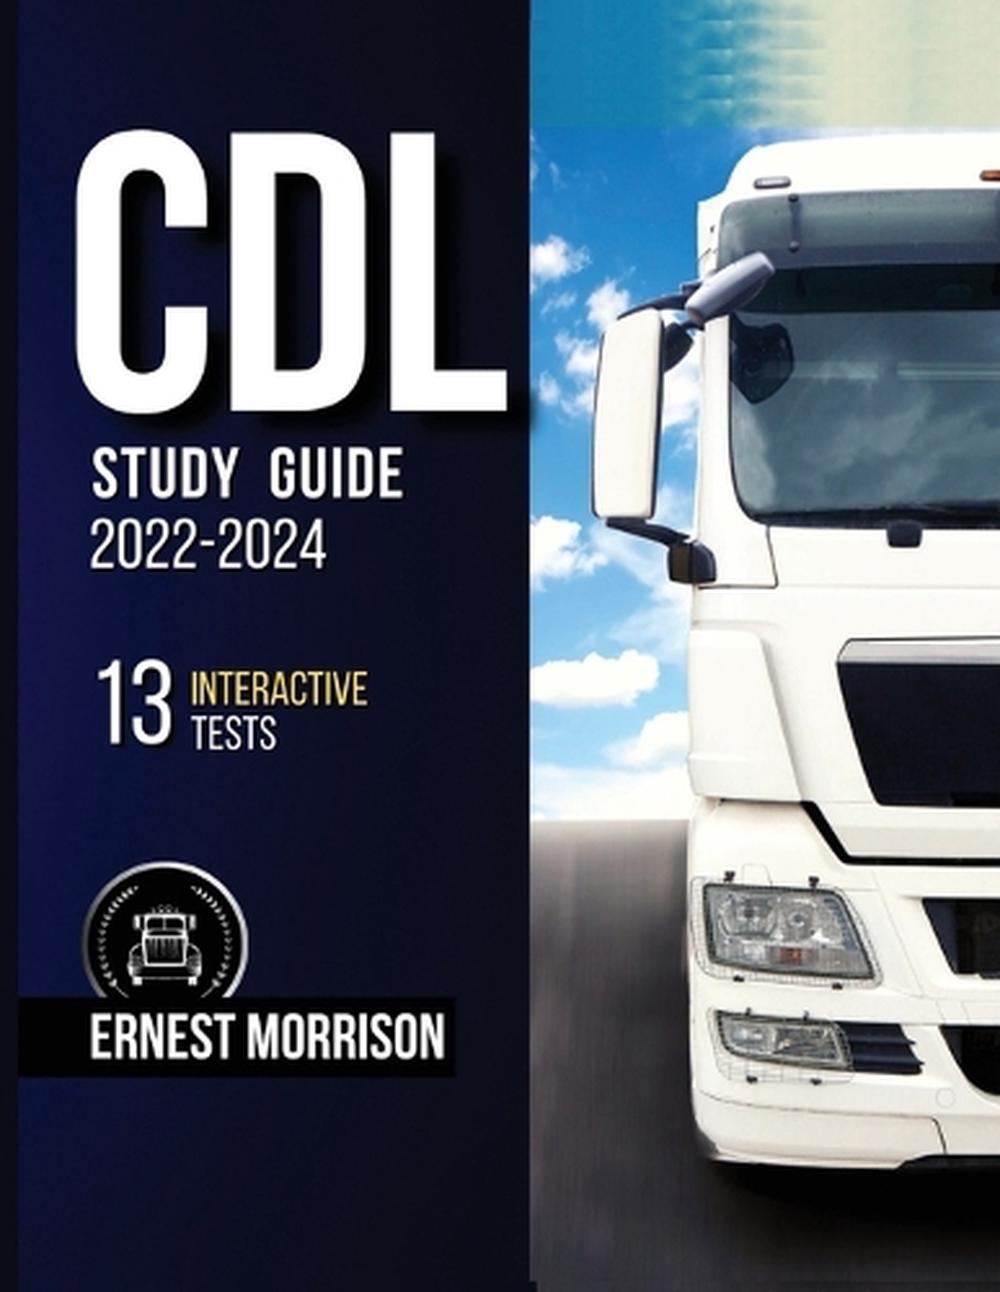 Cdl Study Guide 2022-2024 by Ernest Morrison, 9781804341926 | Buy